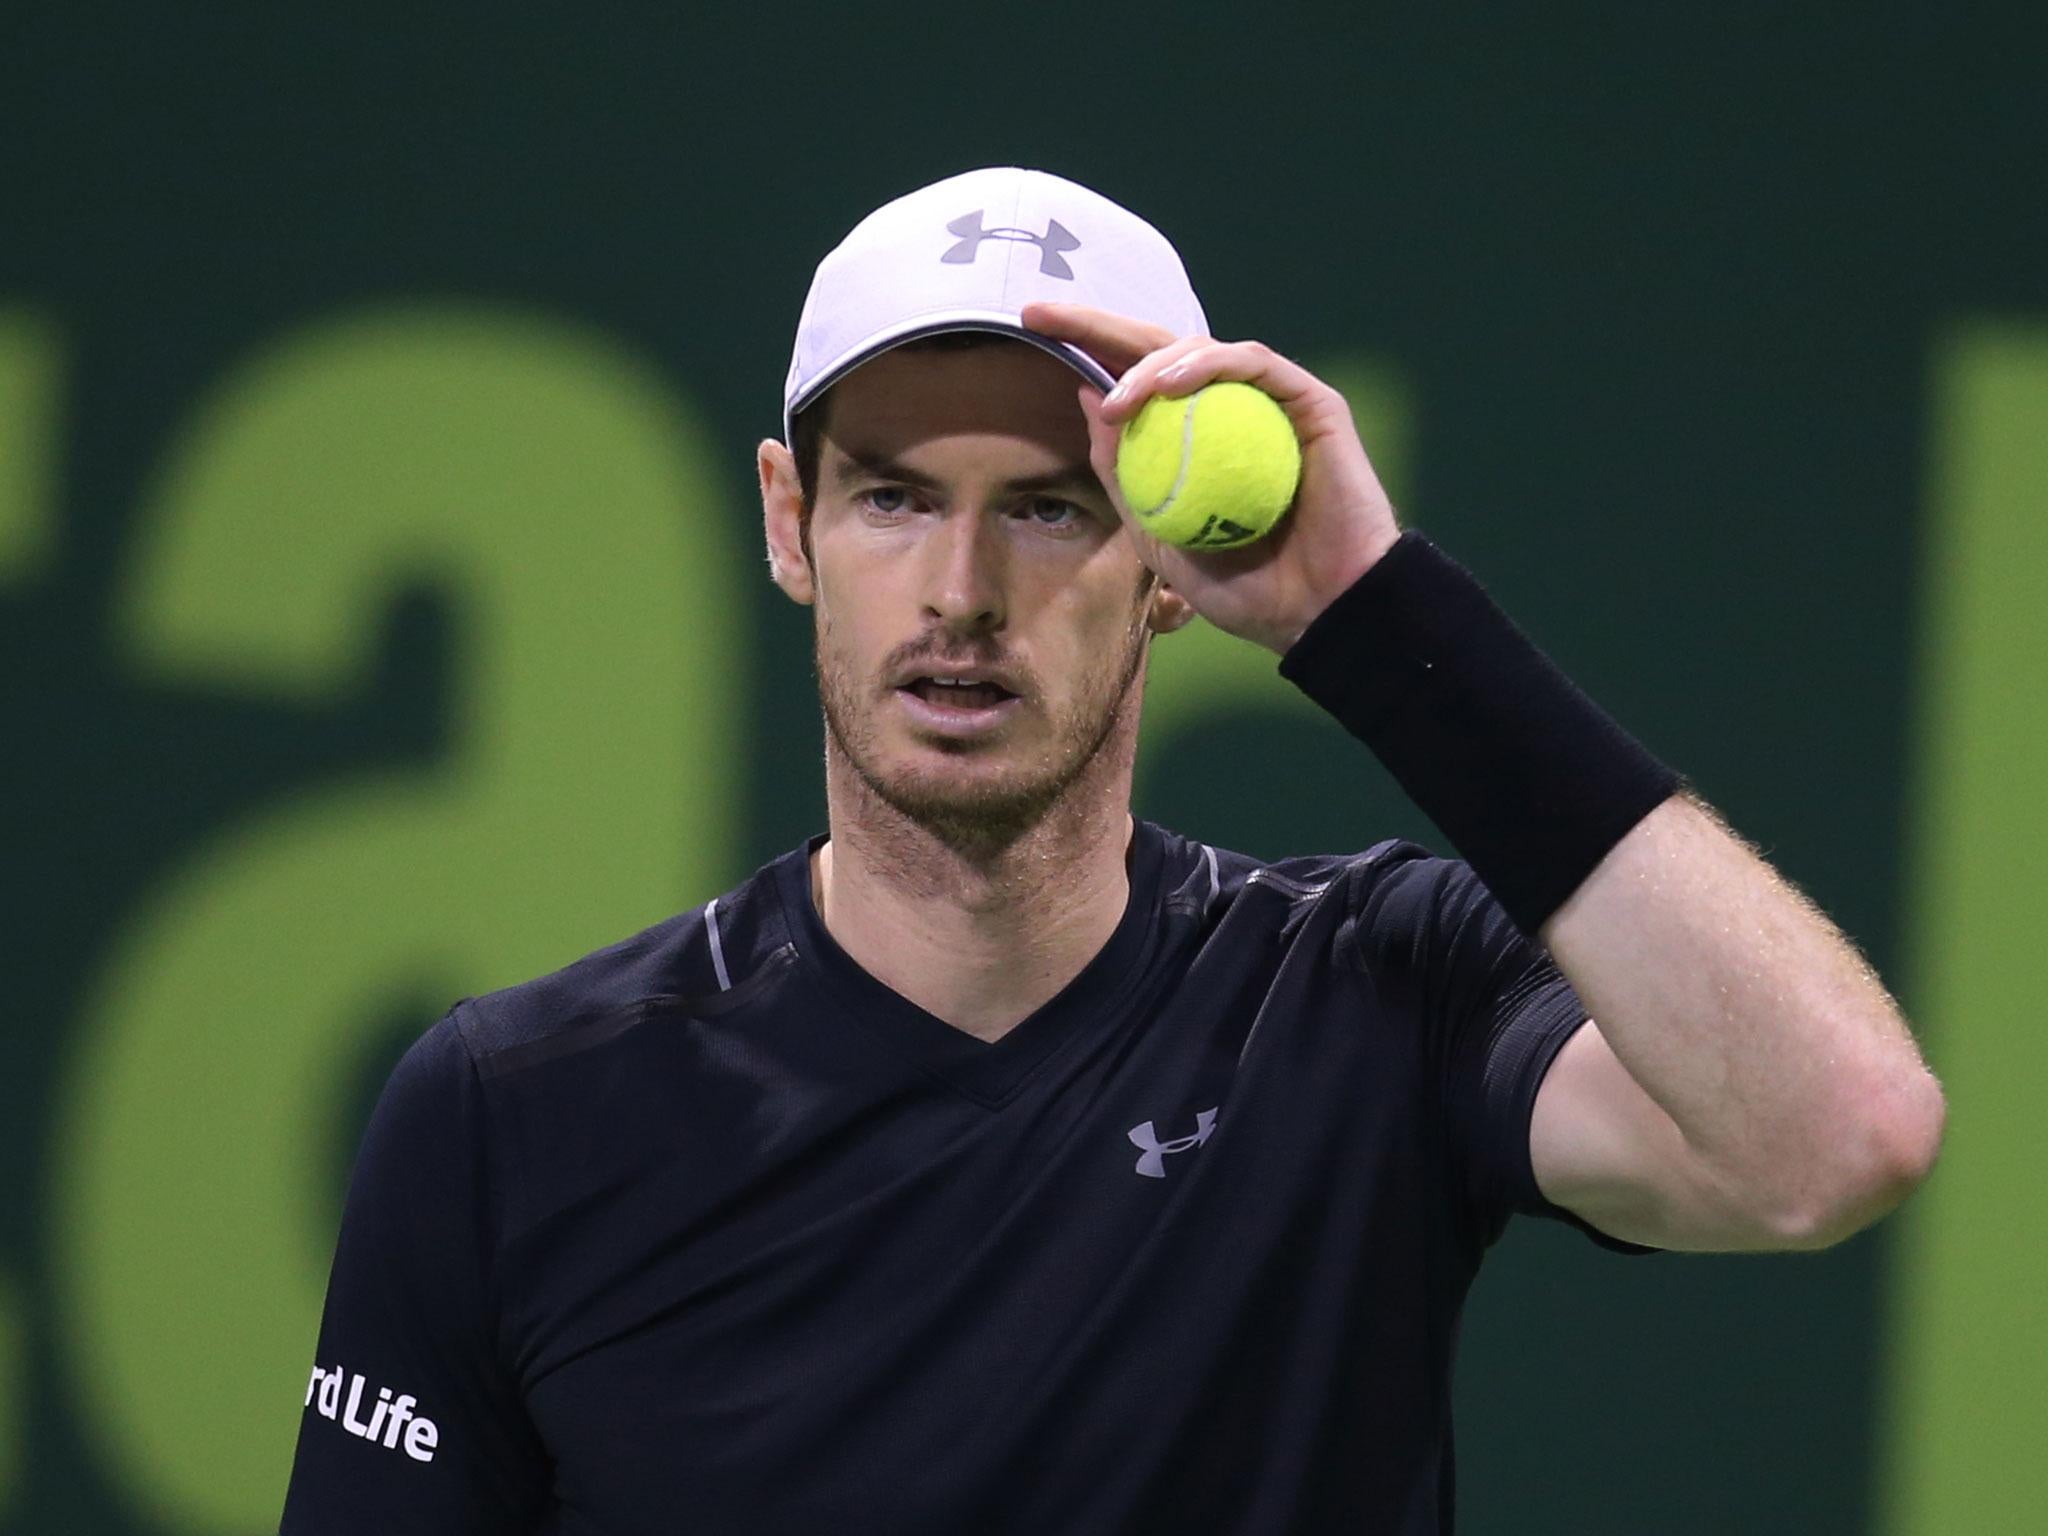 Murray will be referred to as ‘Sir Andy’ by Australian commentators during matches at the Australian Open, but says he would be happy to be called Andy in post-match interviews